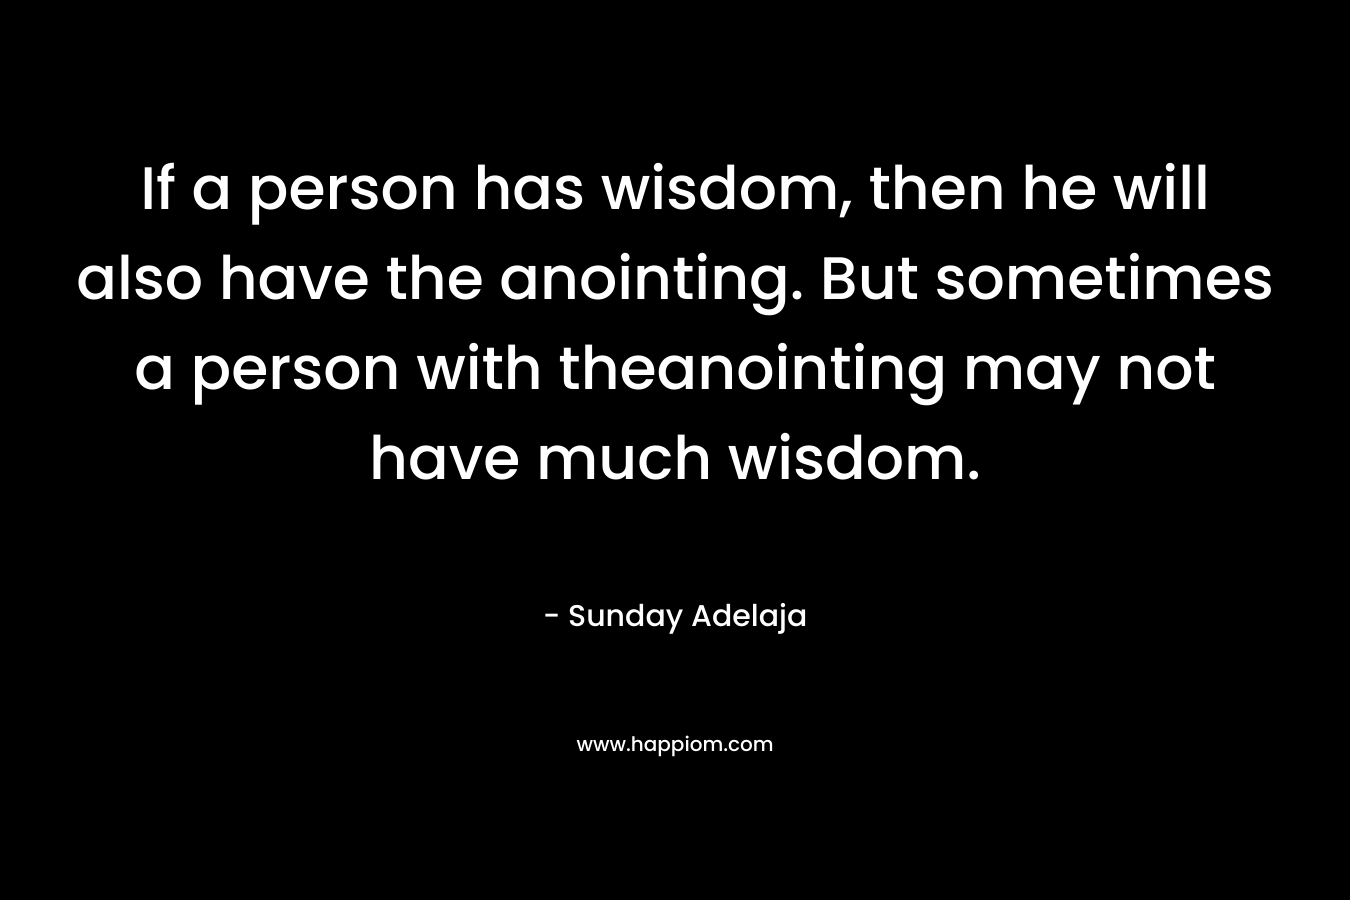 If a person has wisdom, then he will also have the anointing. But sometimes a person with theanointing may not have much wisdom. – Sunday Adelaja